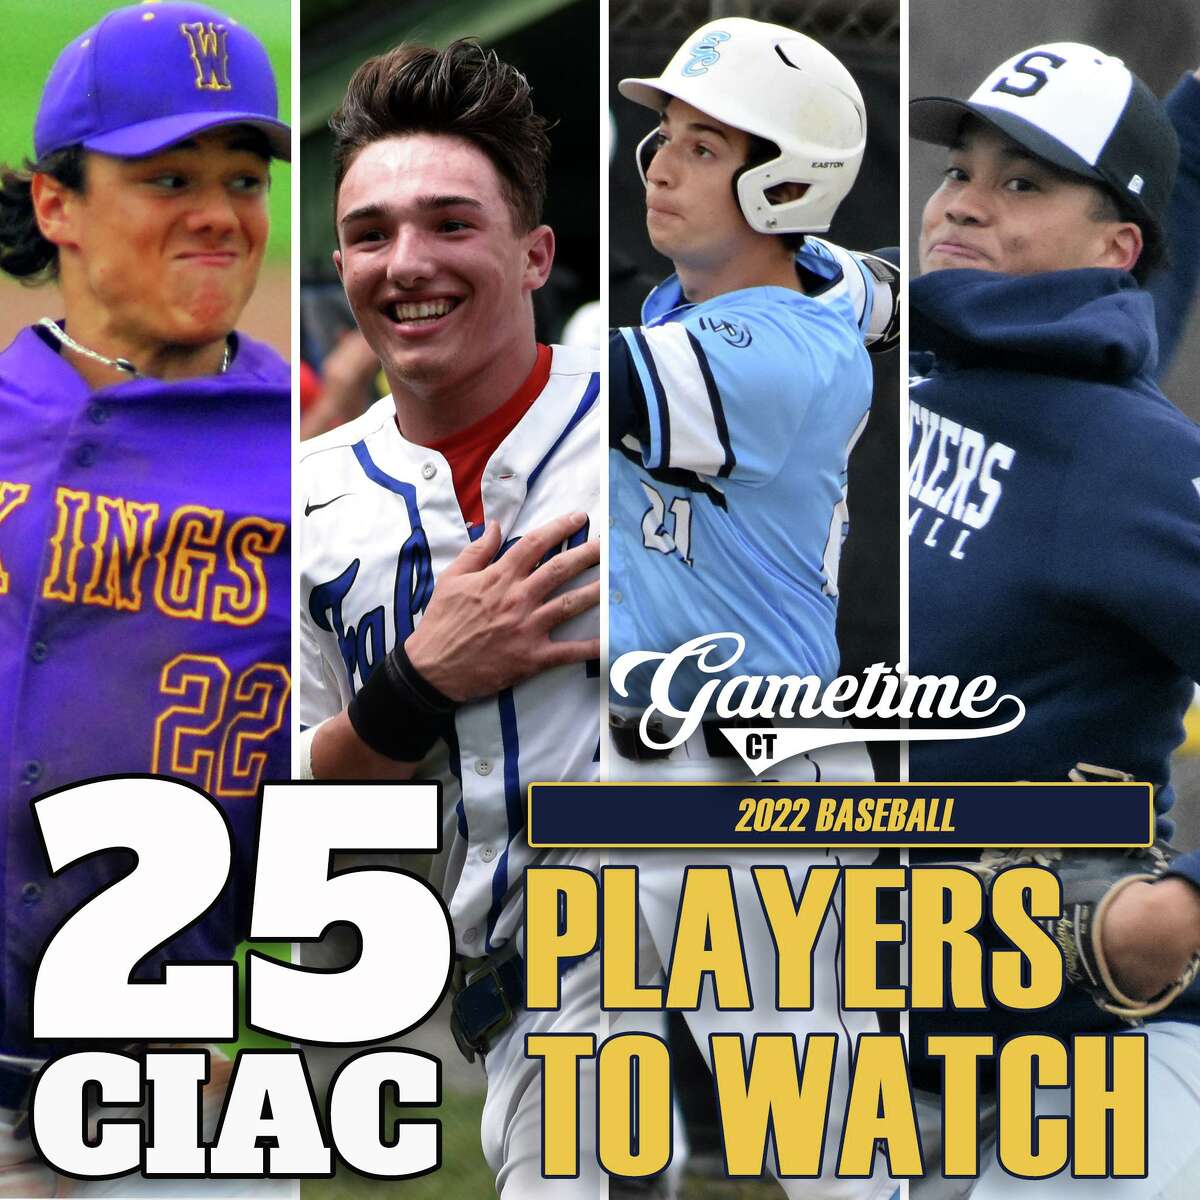 Westhill's Jake Benner, St. Paul's Ryan Daniels, East Catholic's Alex Irizarry and Staples' Hiro Wyatt are some of the 25 baseball players to watch for the 2022 season.